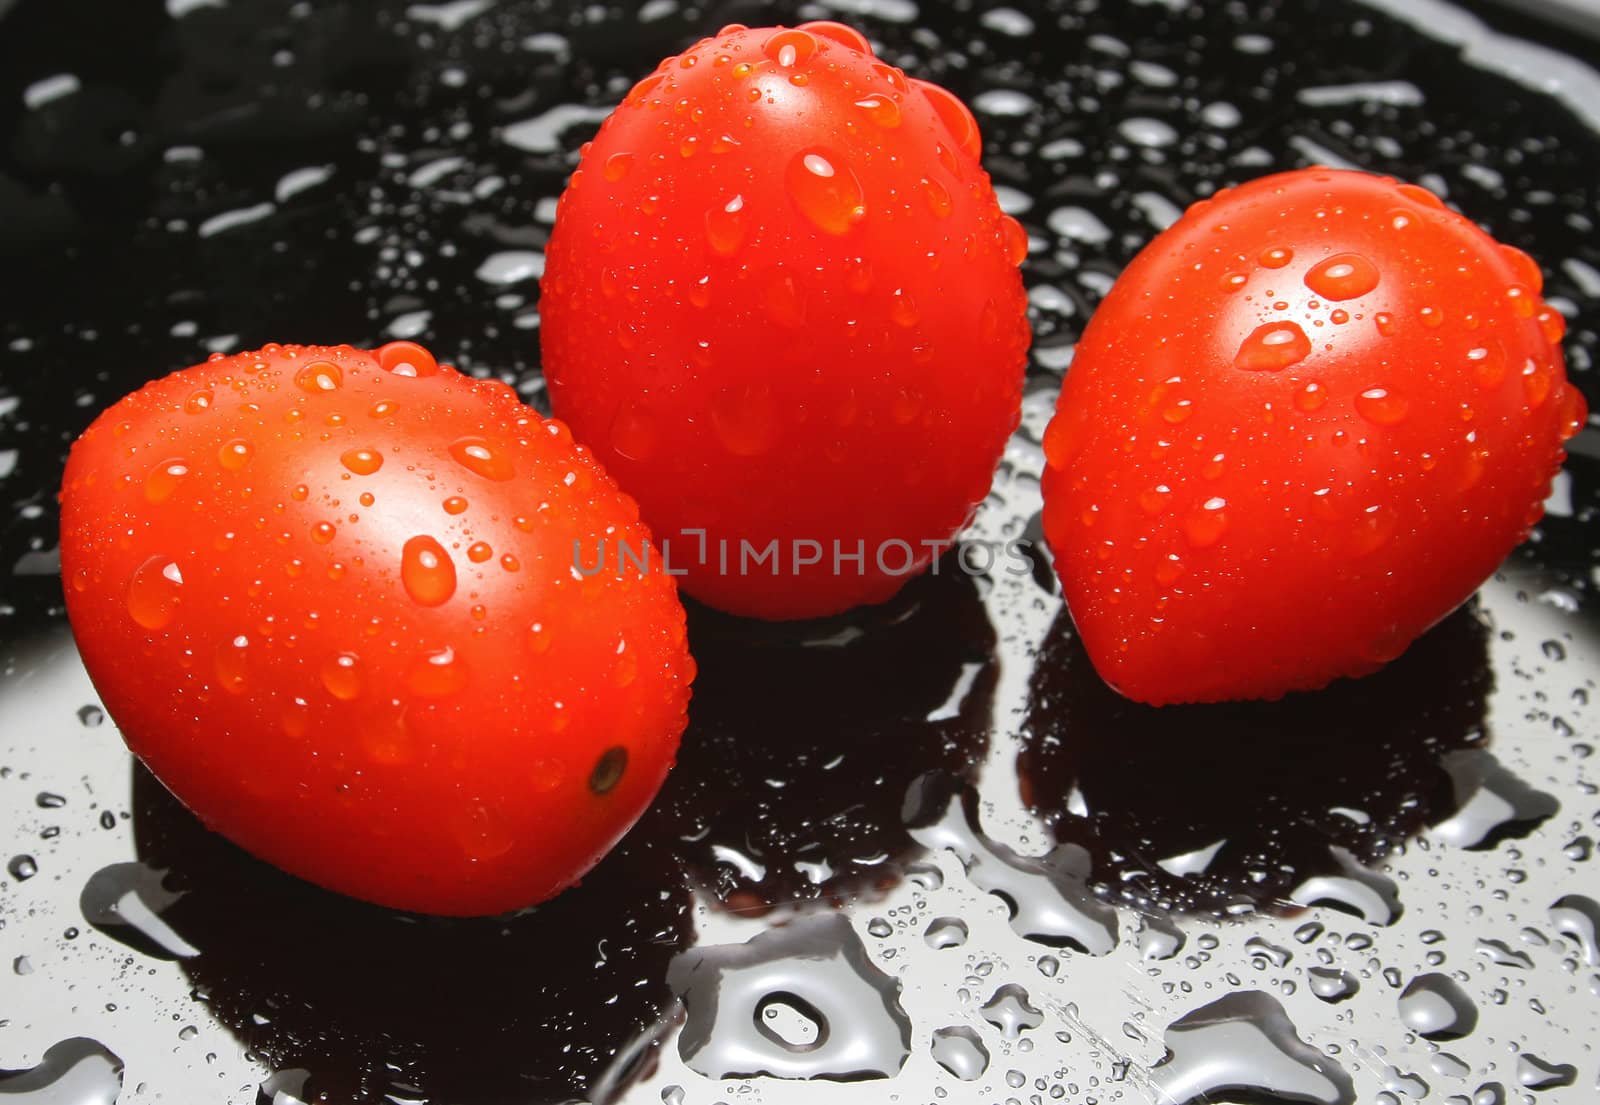 Thee cherry tomatoes with drops on a black plate. Look at my gallery for more fresh fruits and vegetables.